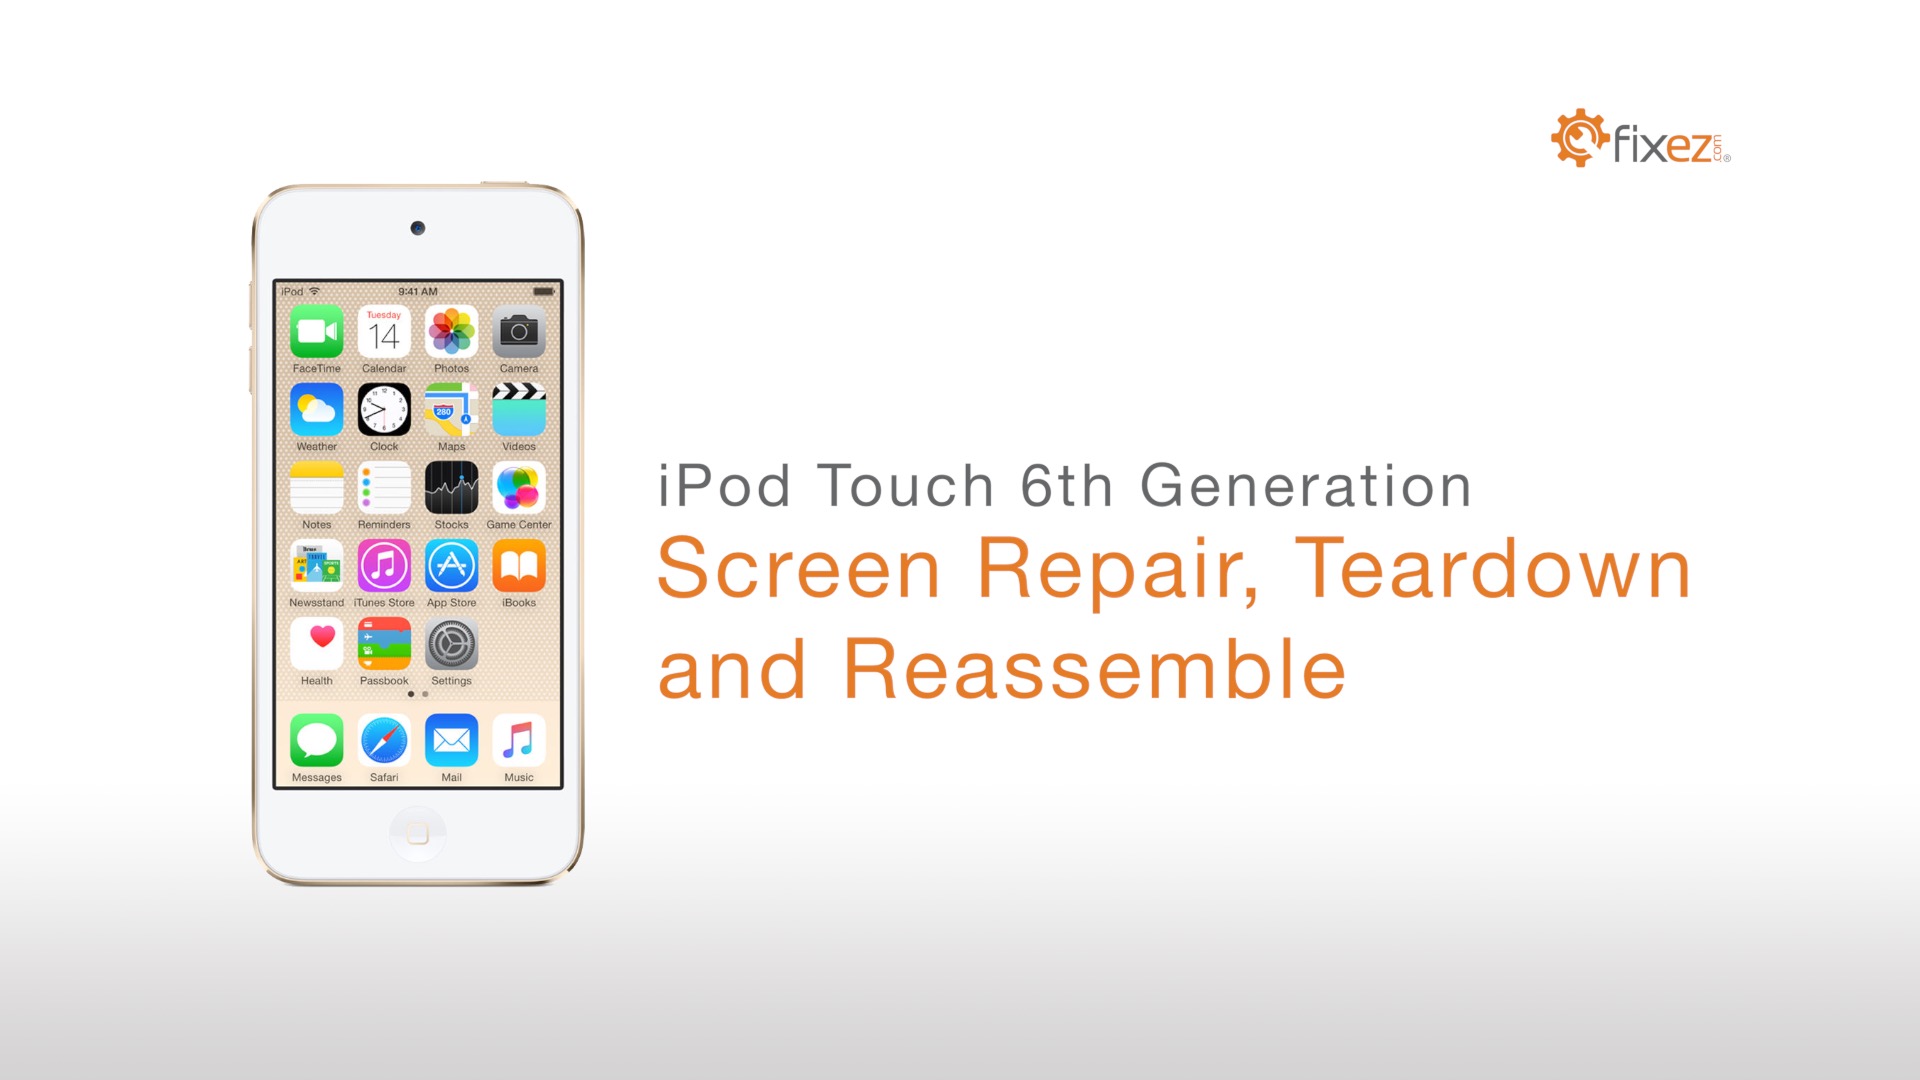 iPod Touch 6th Gen Screen Repair, Teardown and Reassemble